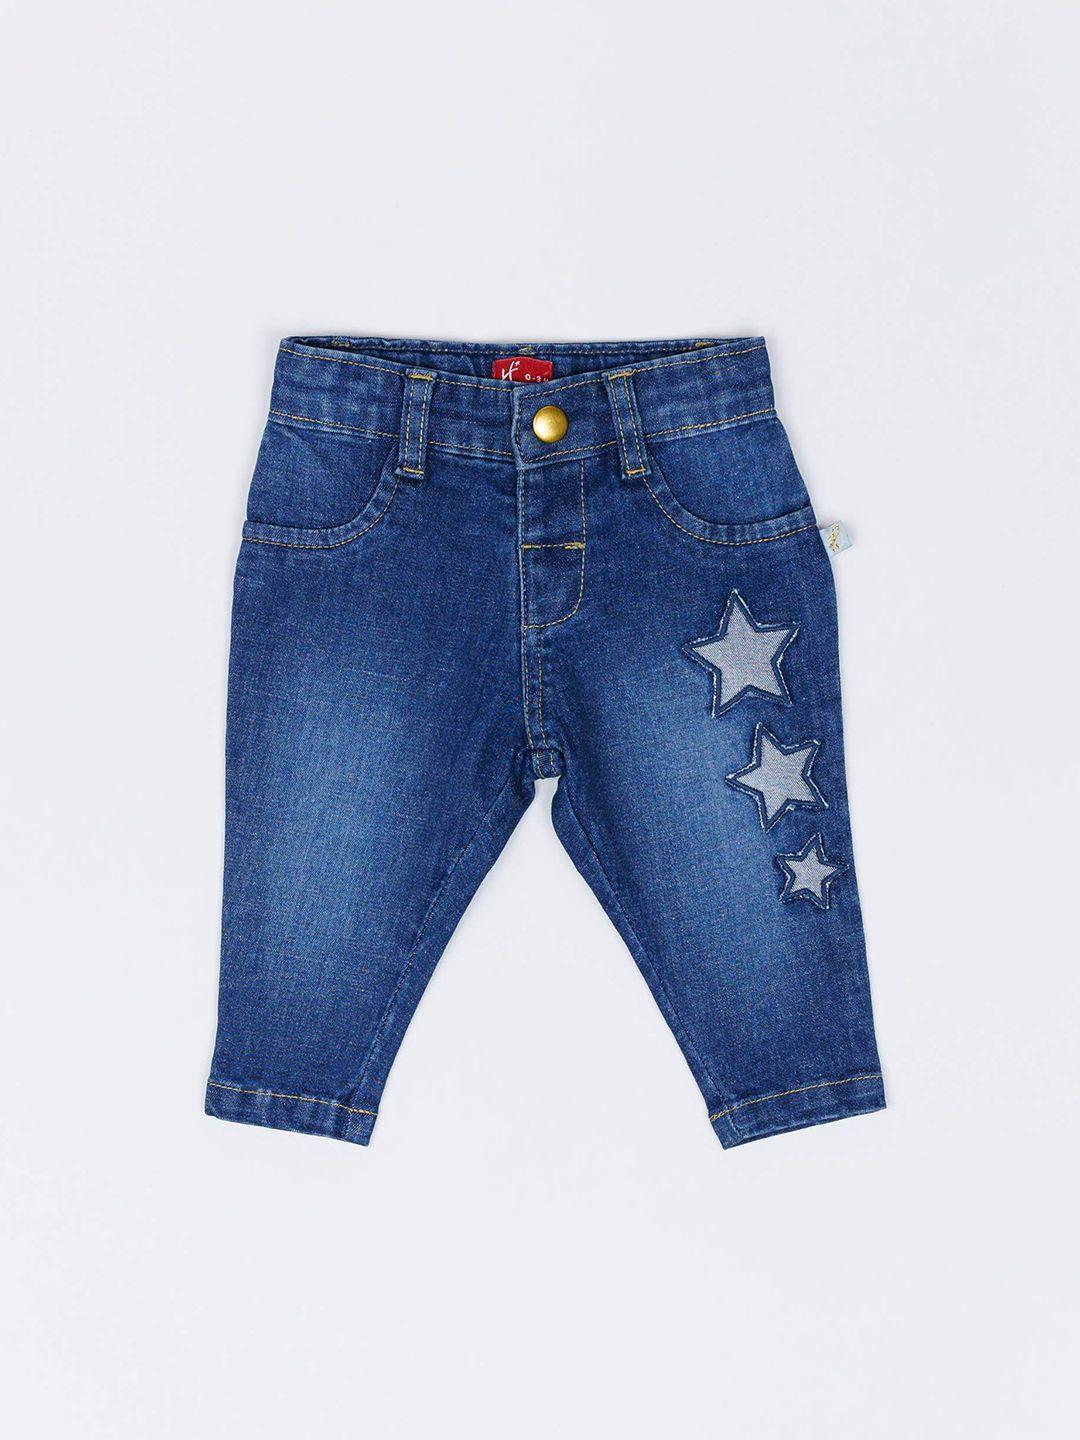 h by hamleys unisex kids light fade printed jeans